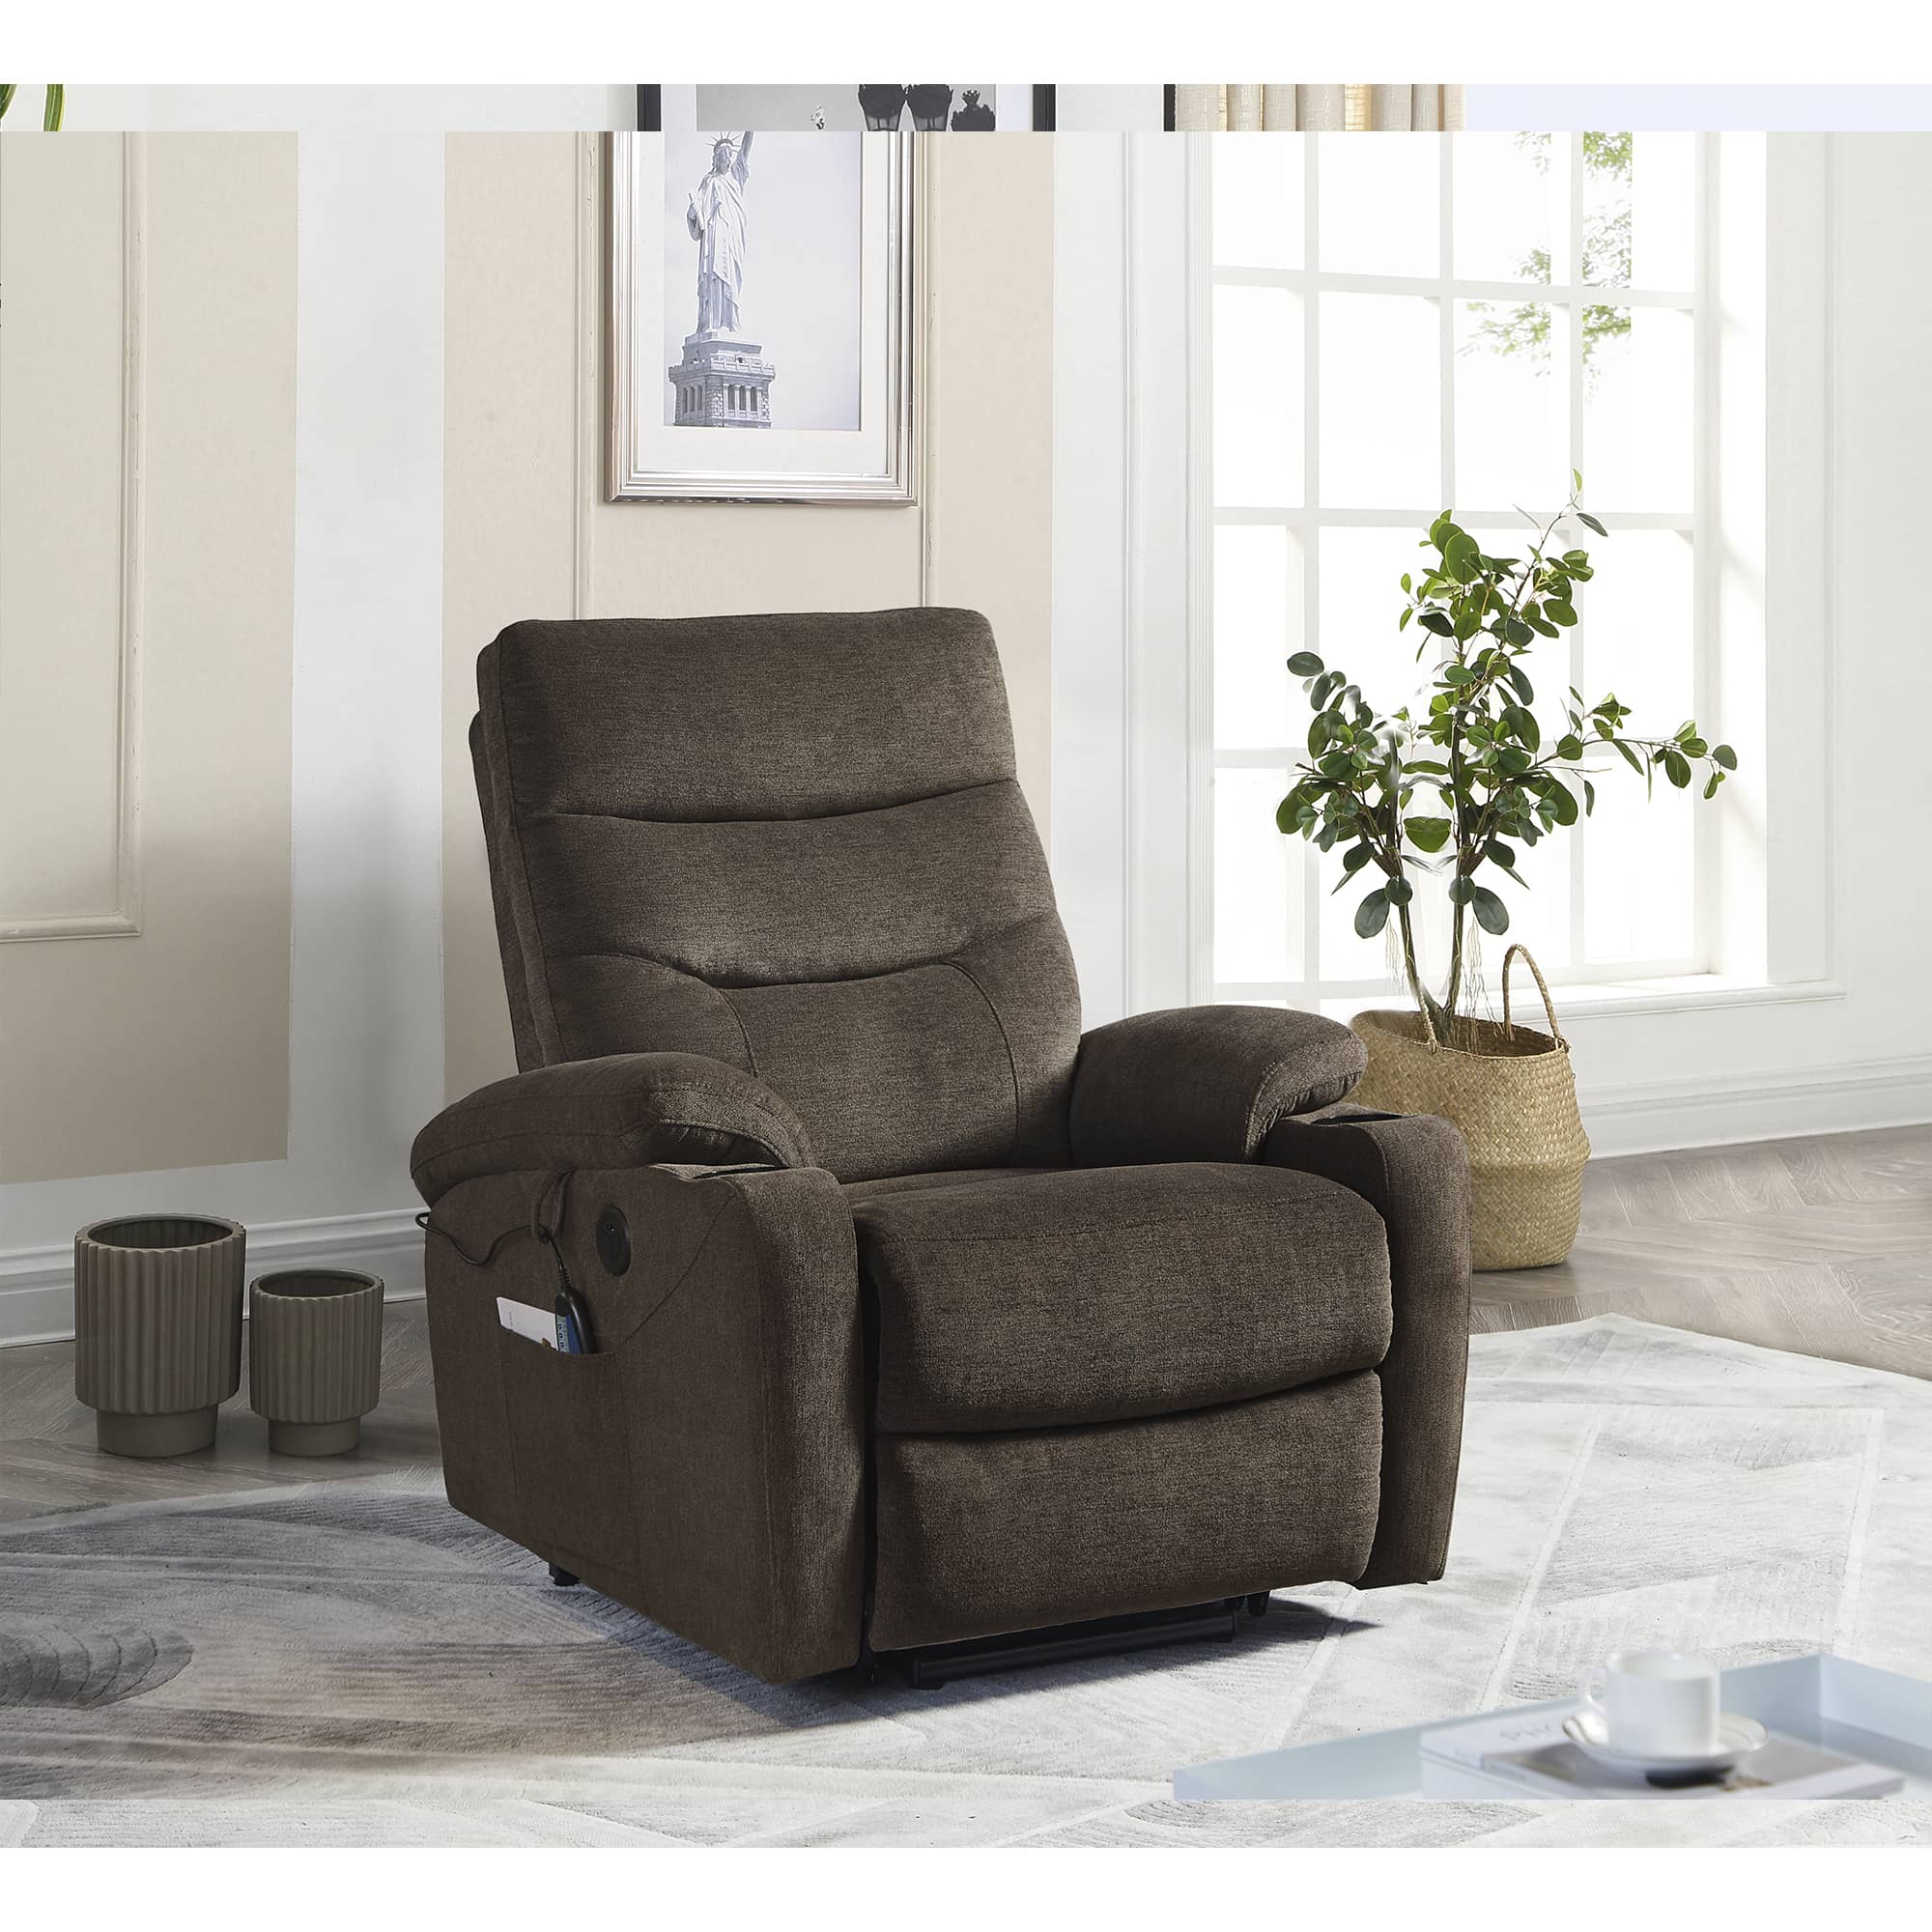 Electric Power Lift Recliner Chair with Massage and Heat, Dark Brown, room view